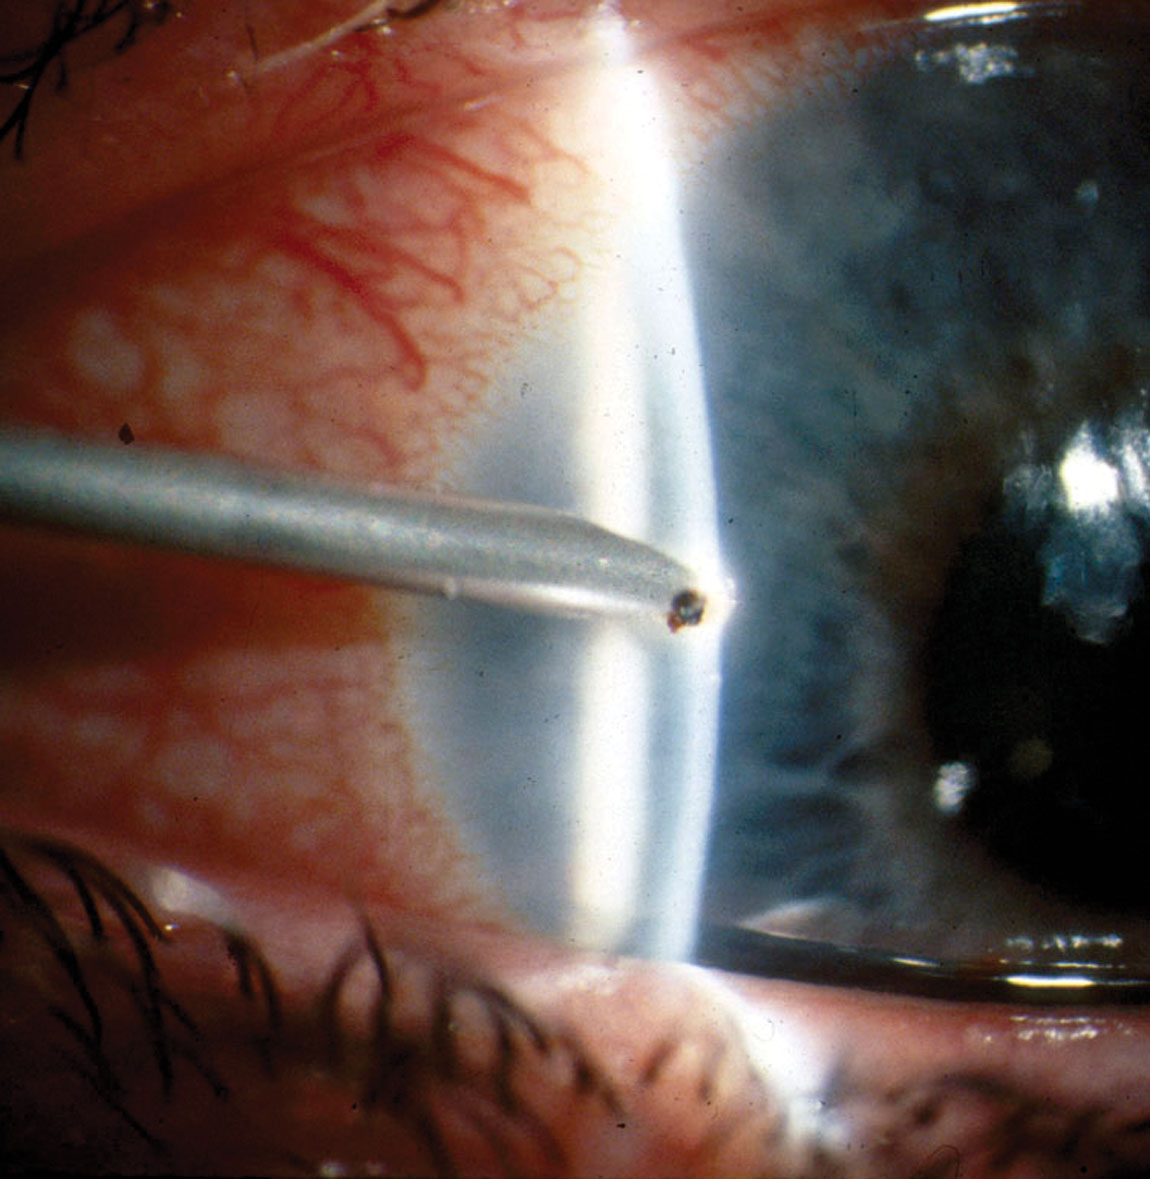 The incidence rate of infectious keratitis within three days post-corneal foreign body removal was around 5% in this study and non-dependent on treatment (antiseptics vs. antibiotics).